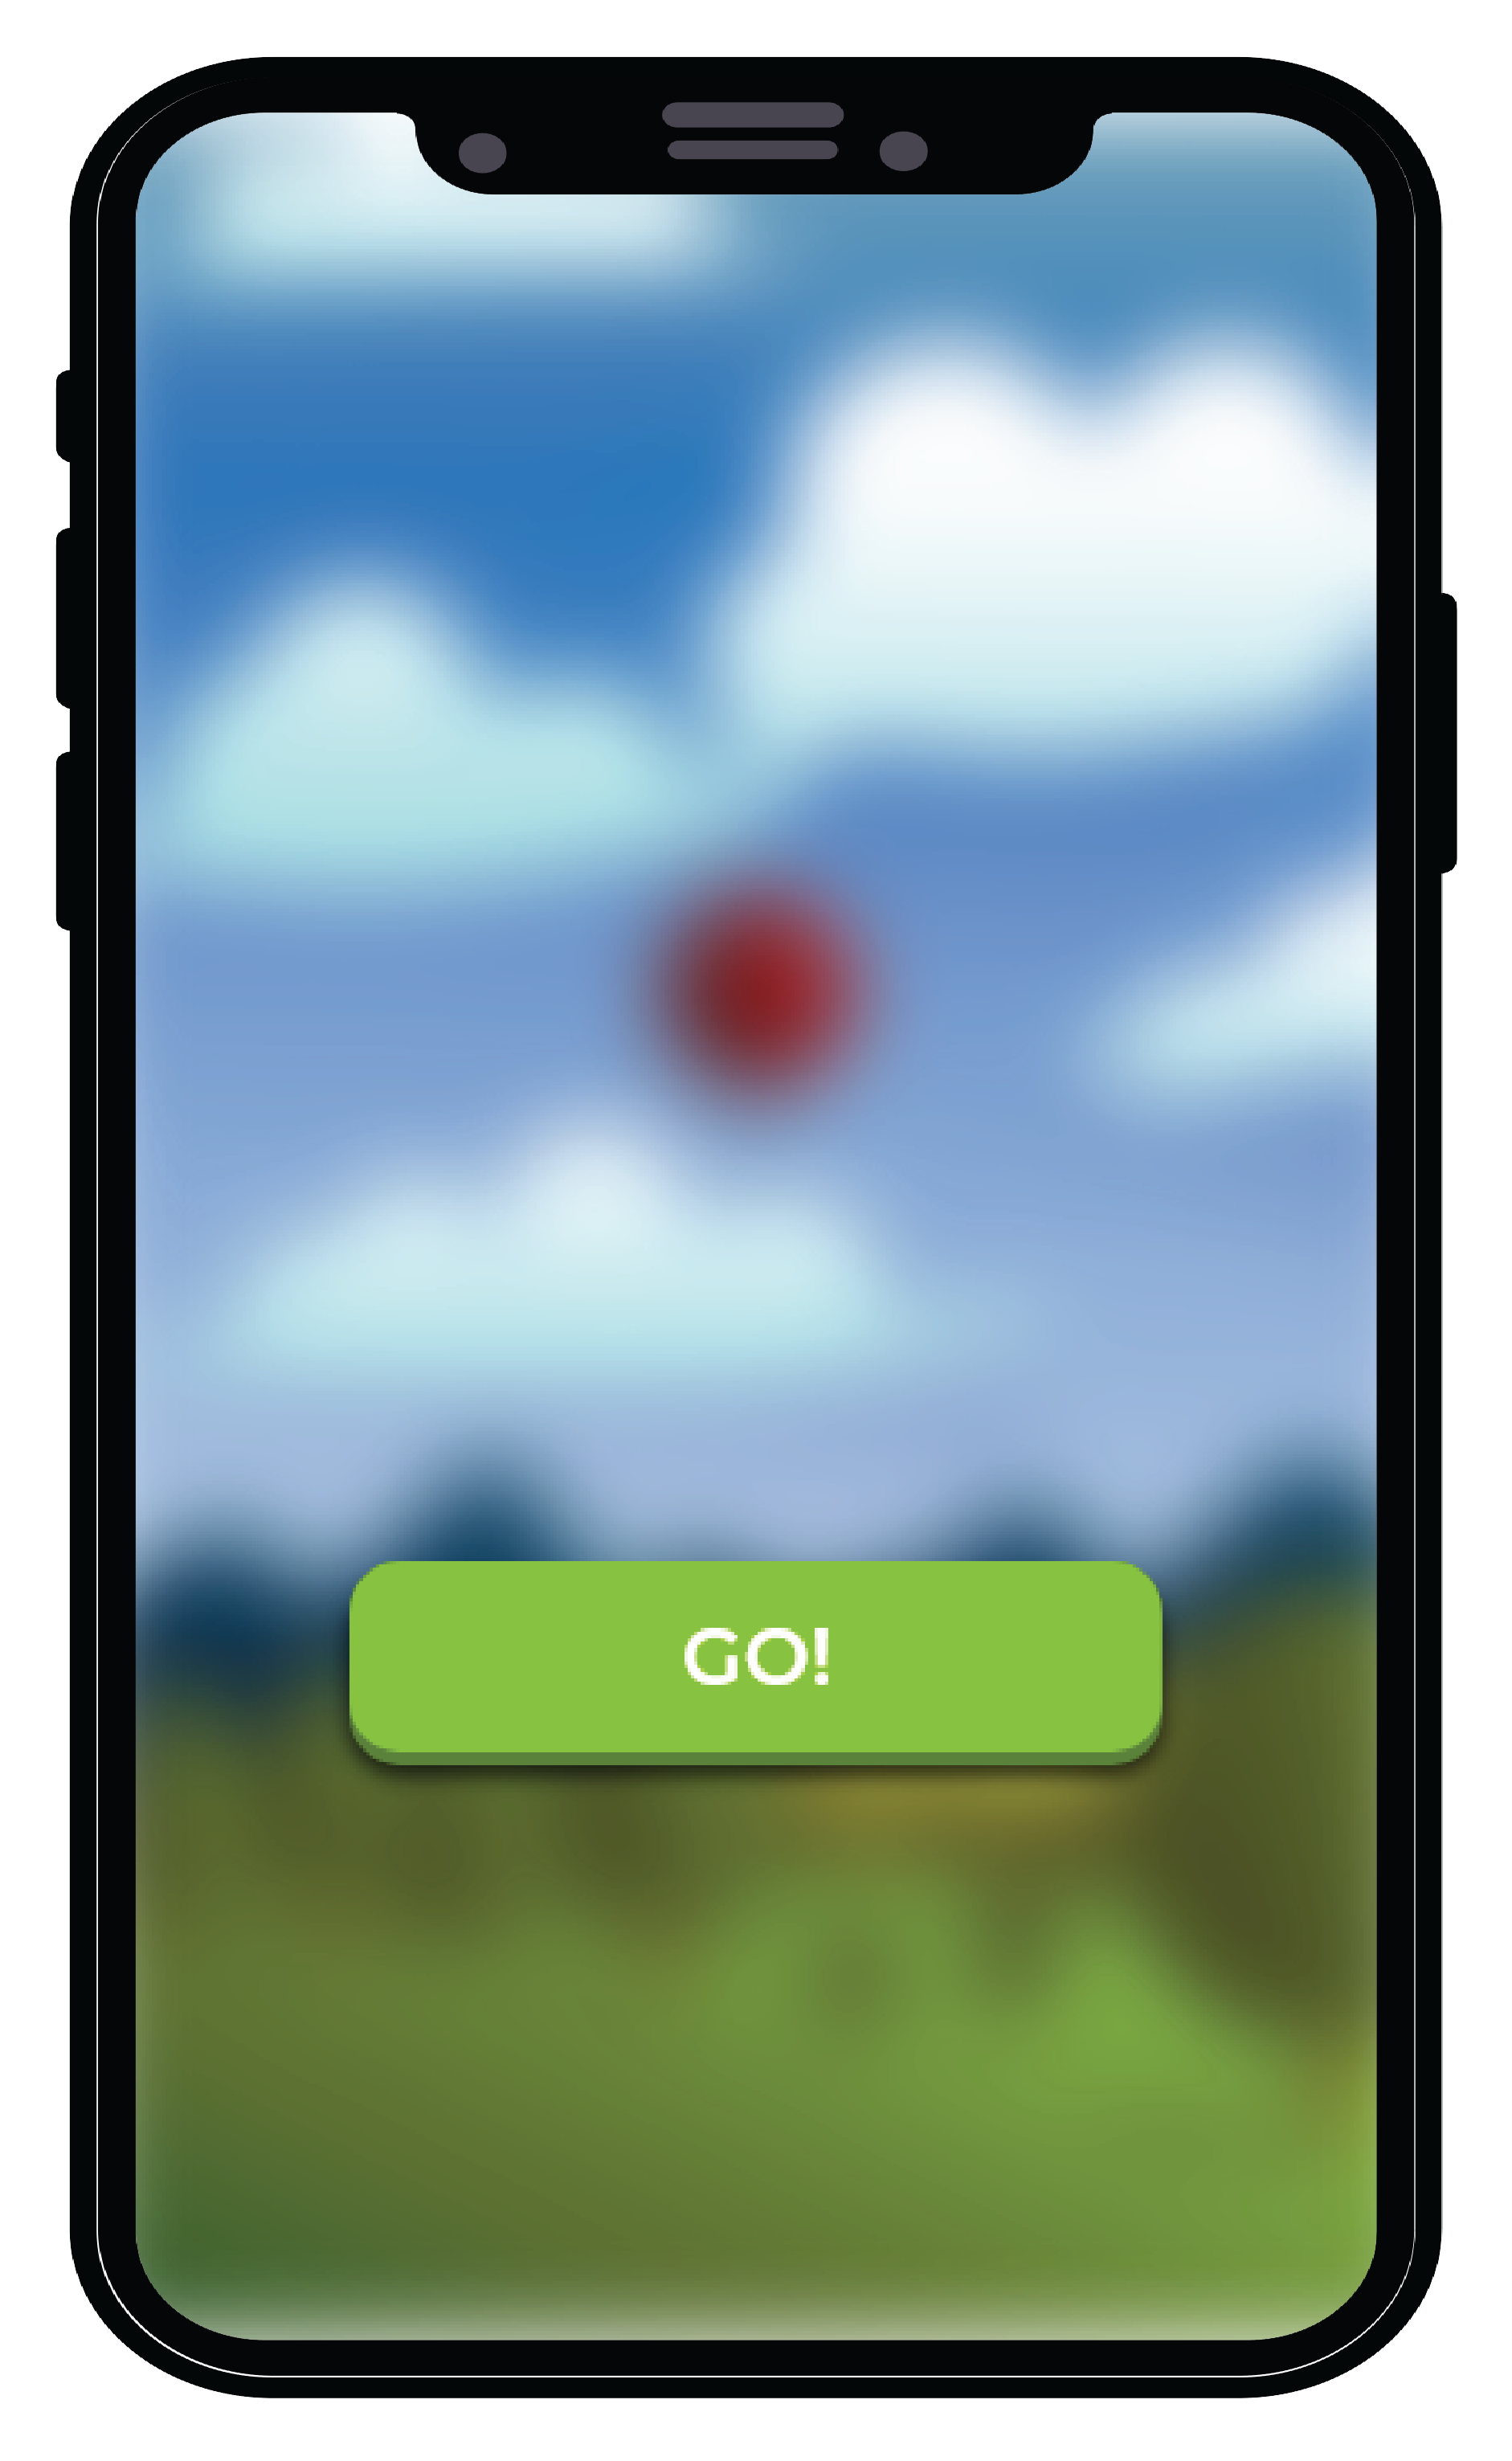 Responsive image about the balloon game